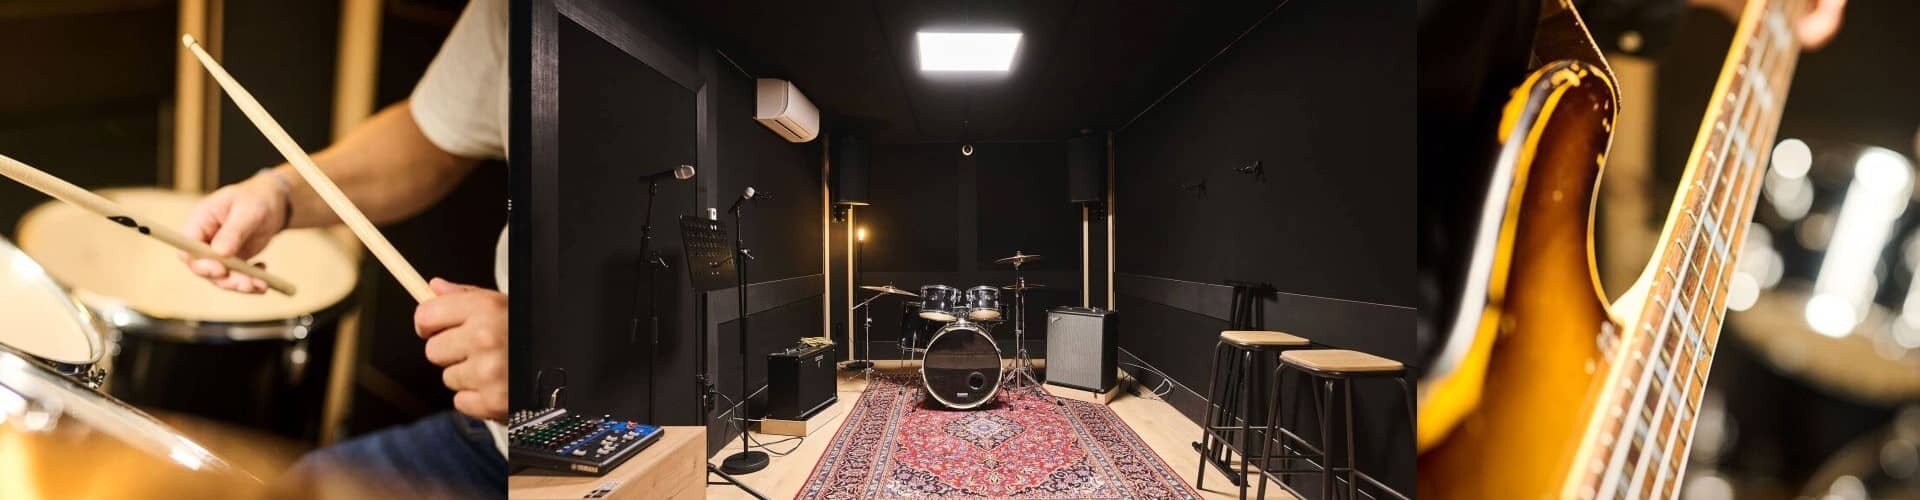 Drum toms, interior of an equipped rehearsal space, and vintage bass neck.